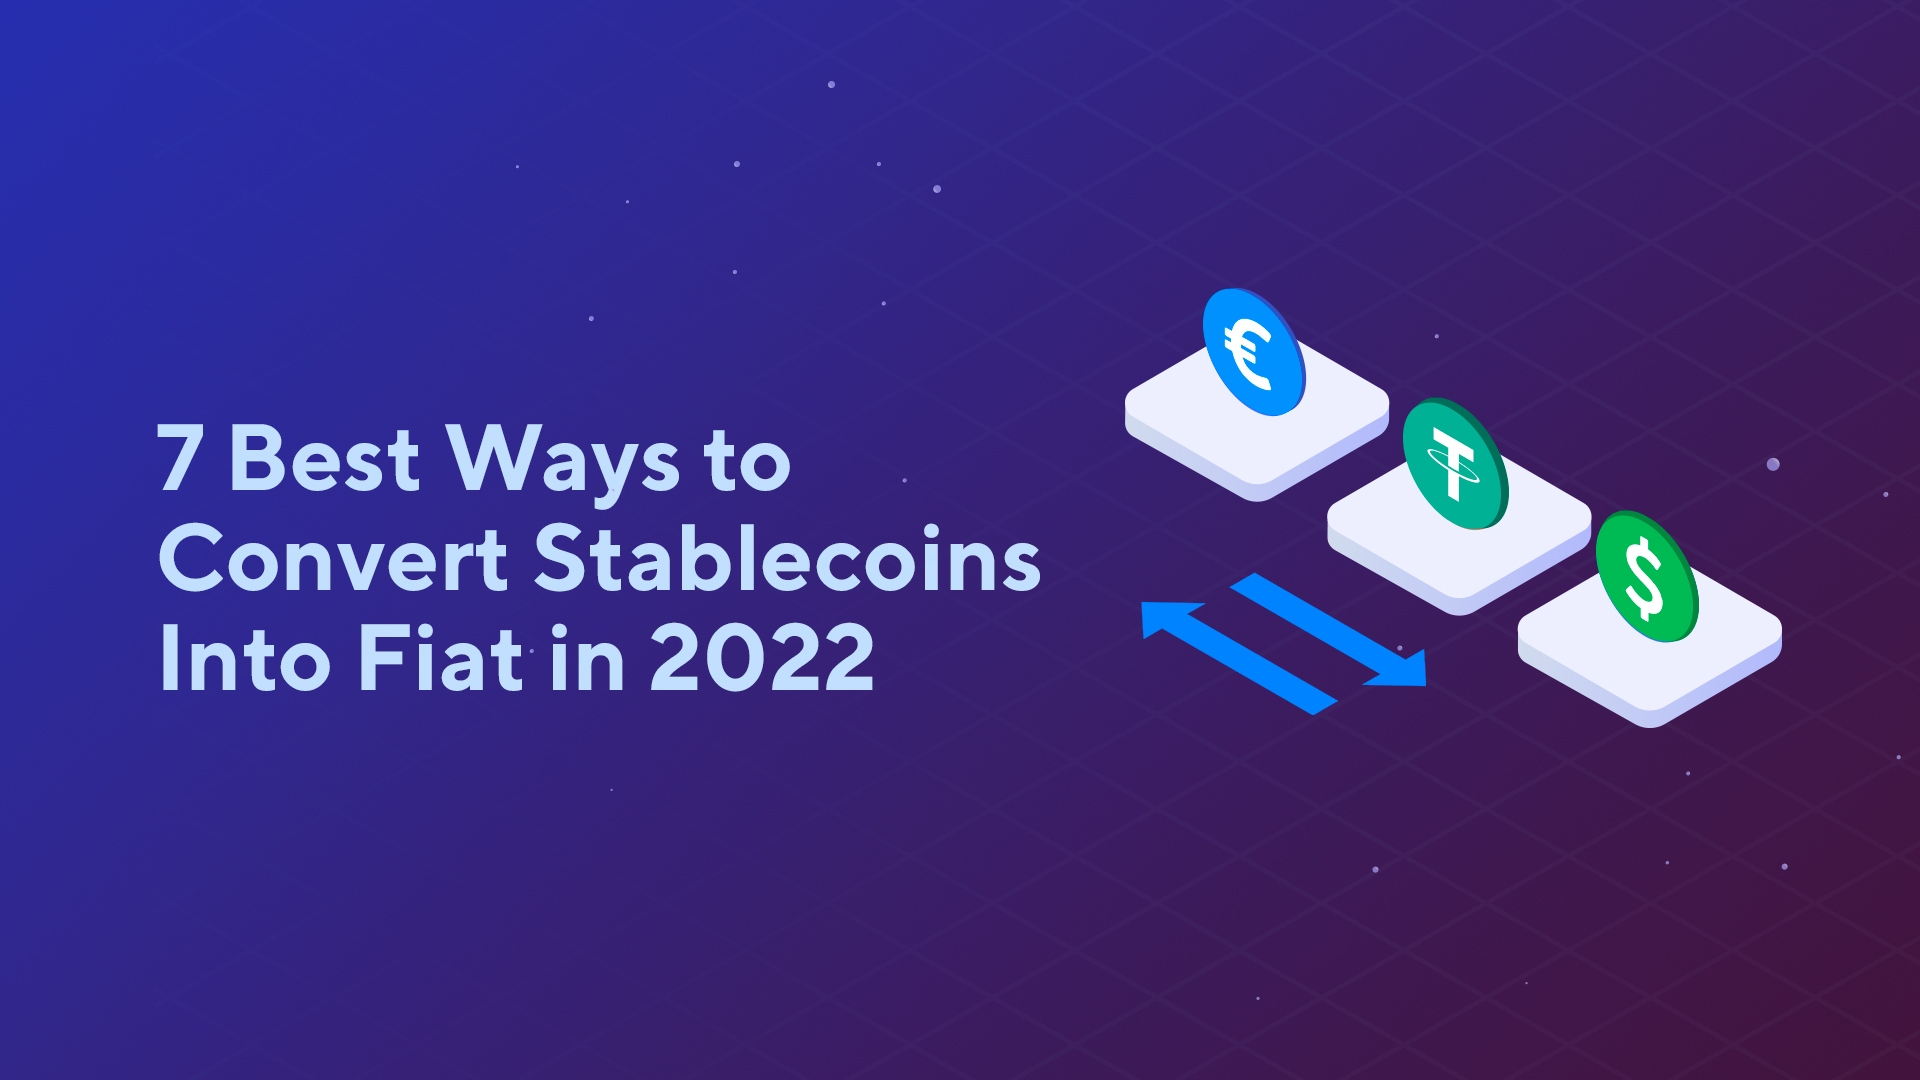 7 Best Ways to Convert Stablecoins Into Fiat in 2023